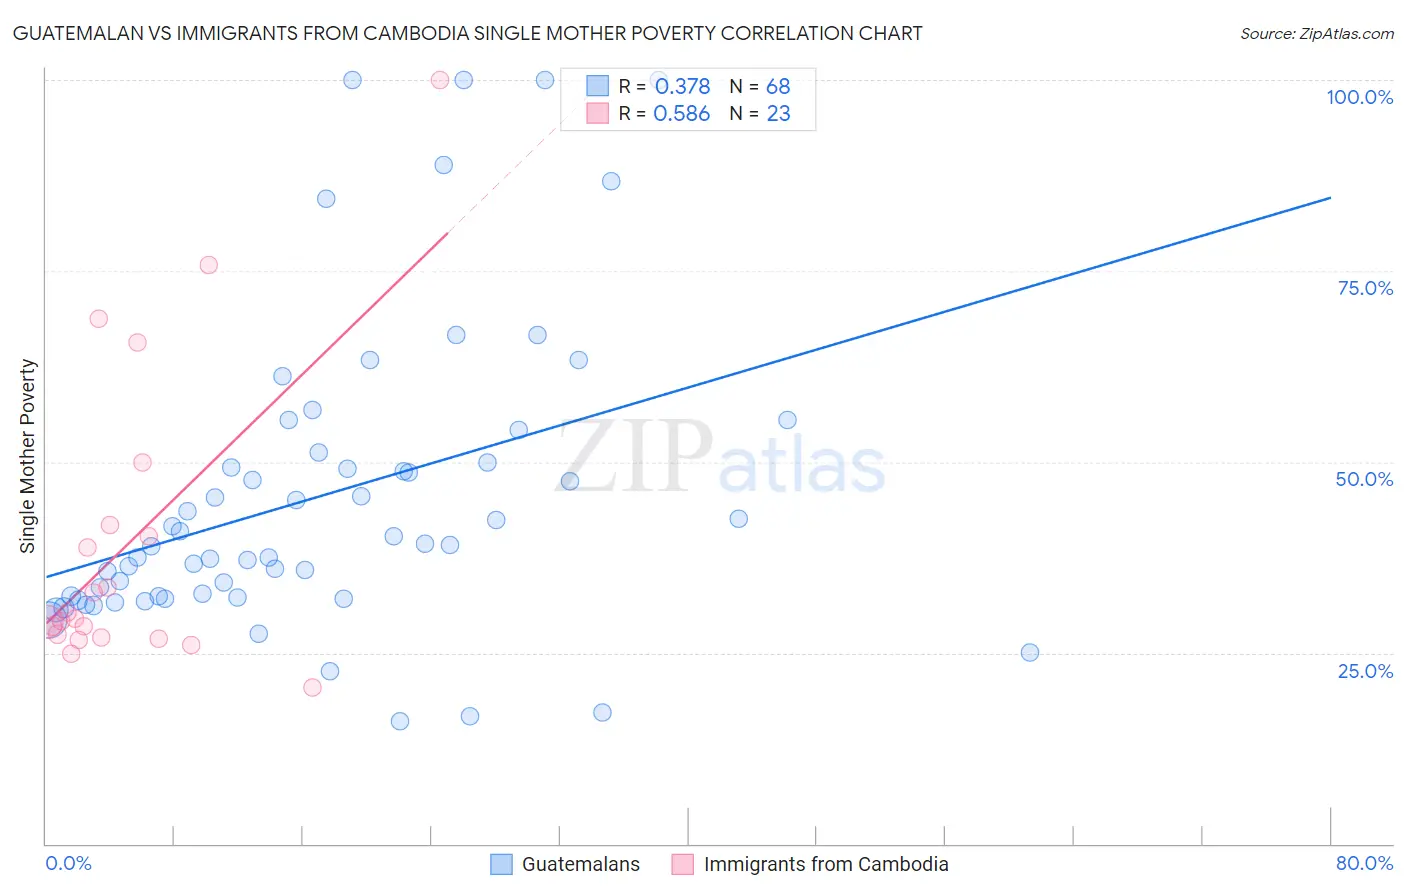 Guatemalan vs Immigrants from Cambodia Single Mother Poverty